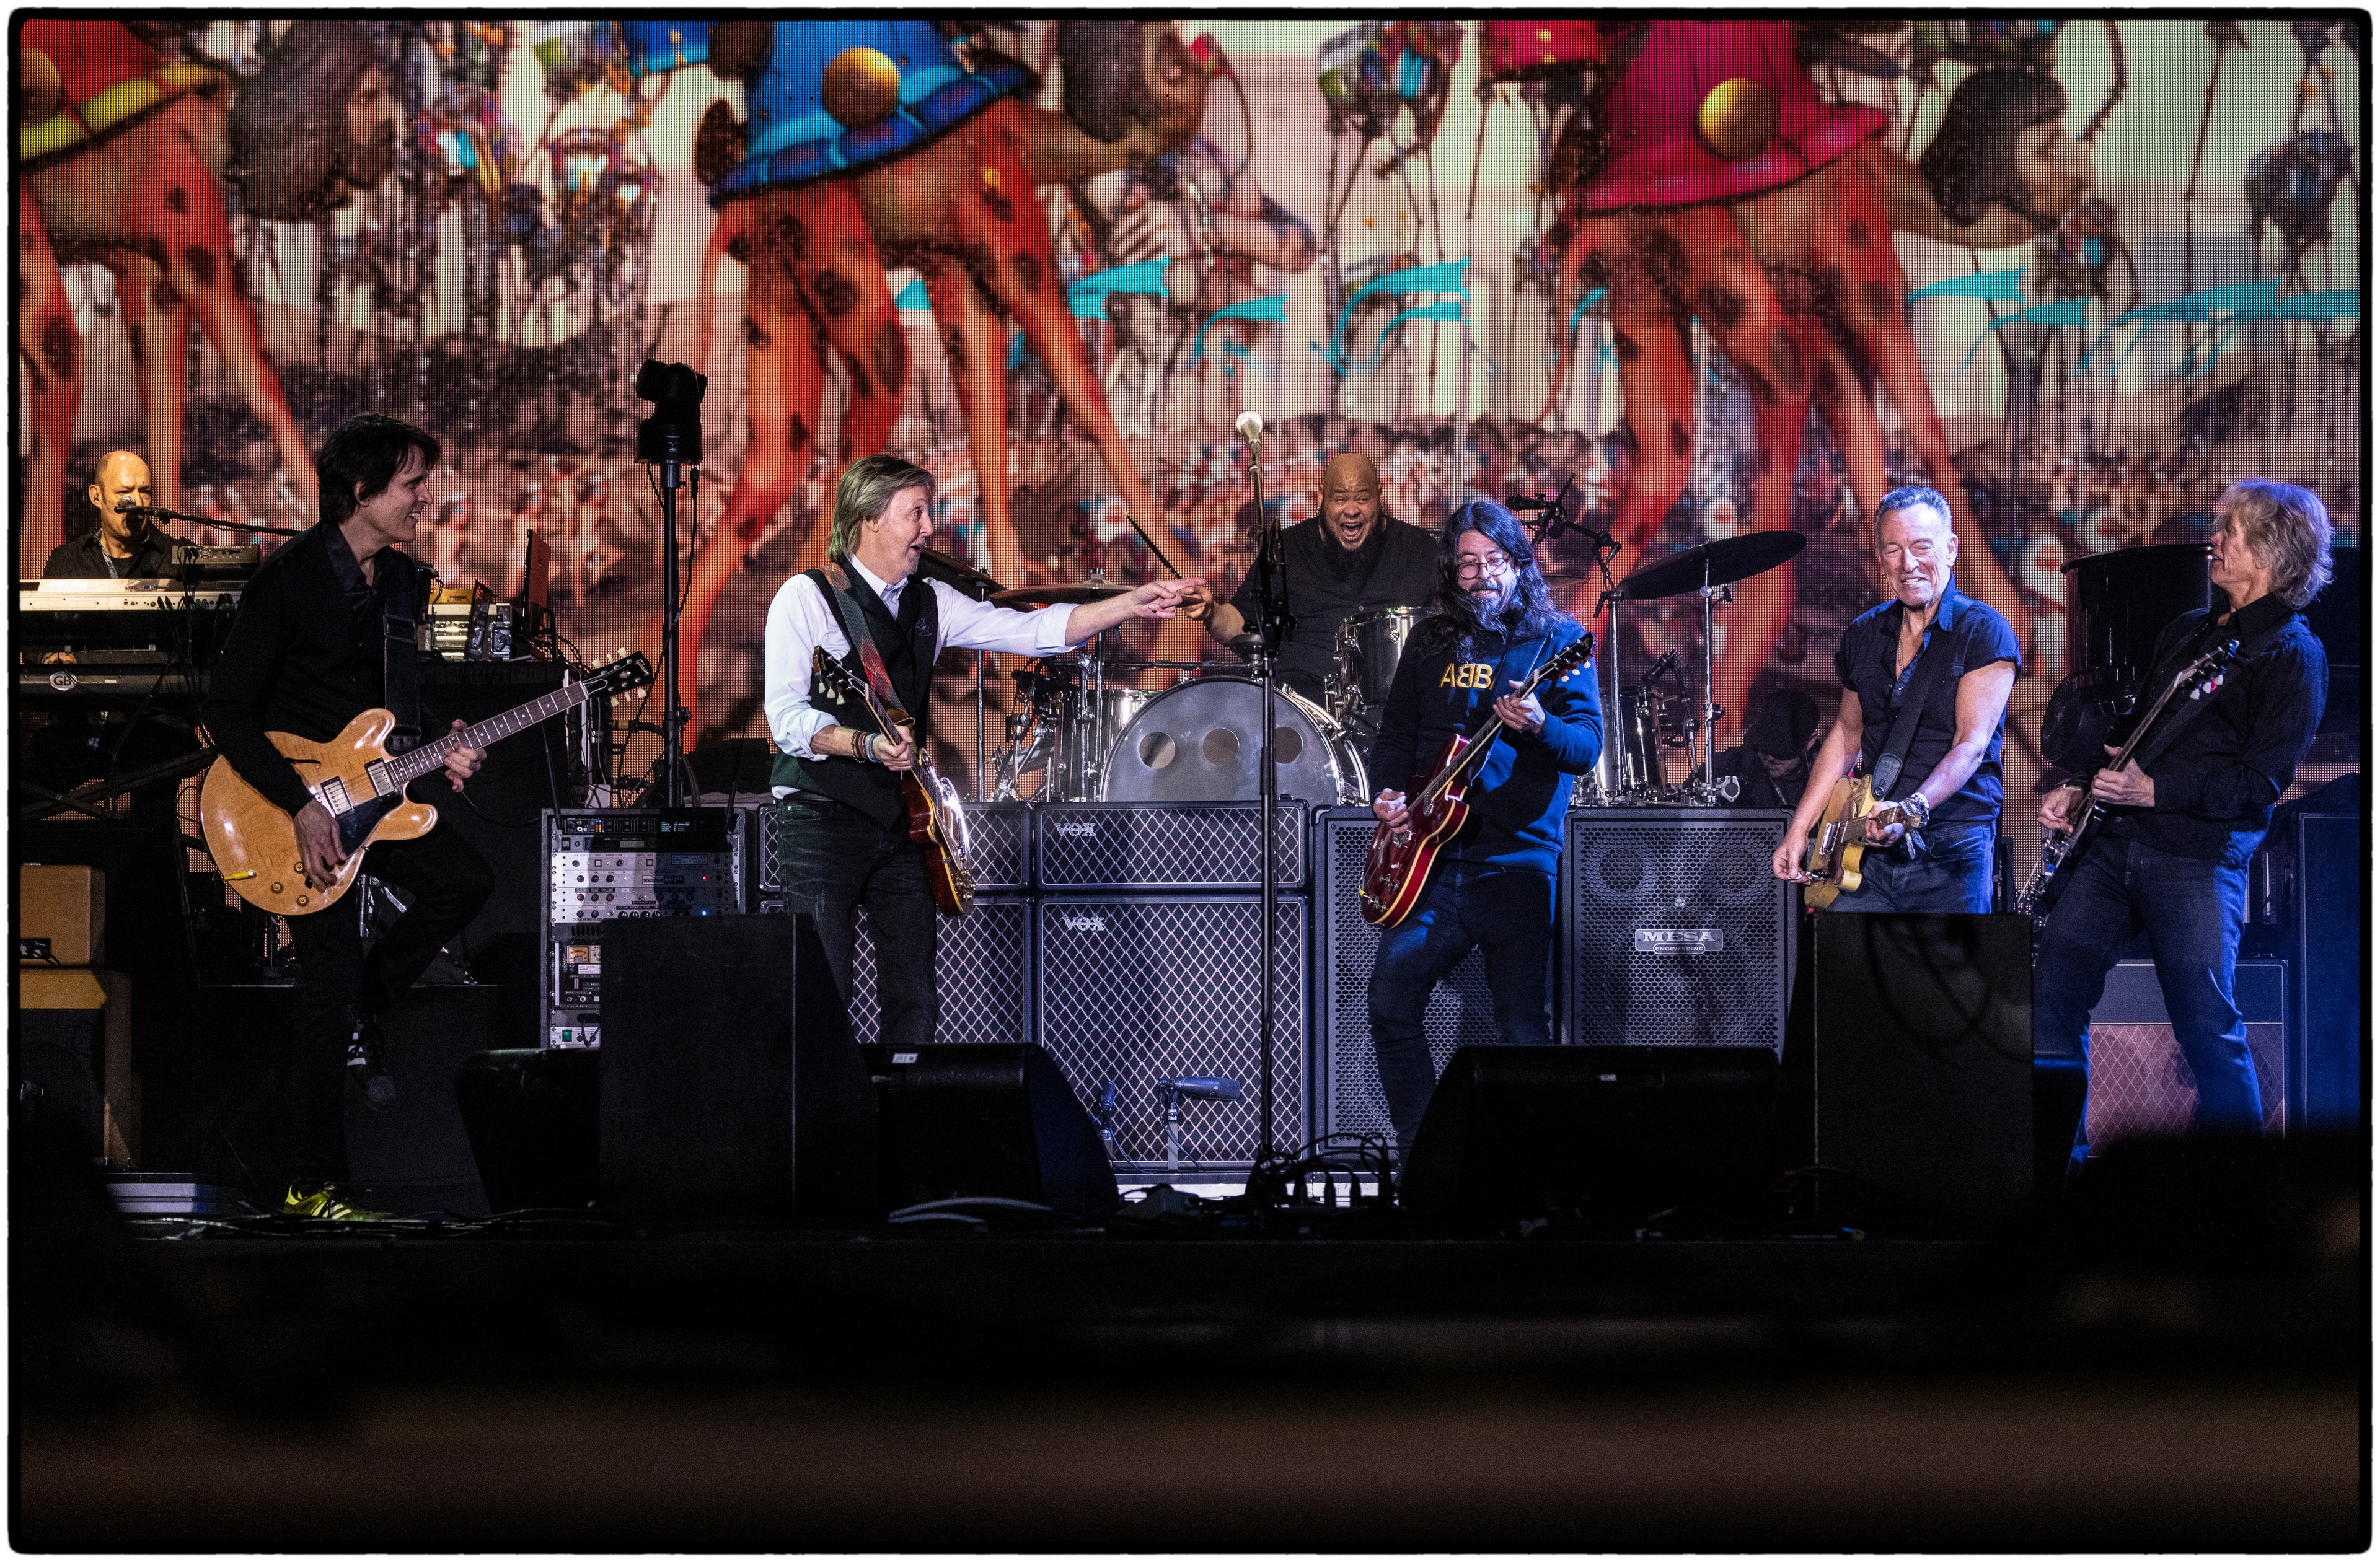 Paul and the band play with Dave Grohl and Bruce Springsteen at Glastonbury